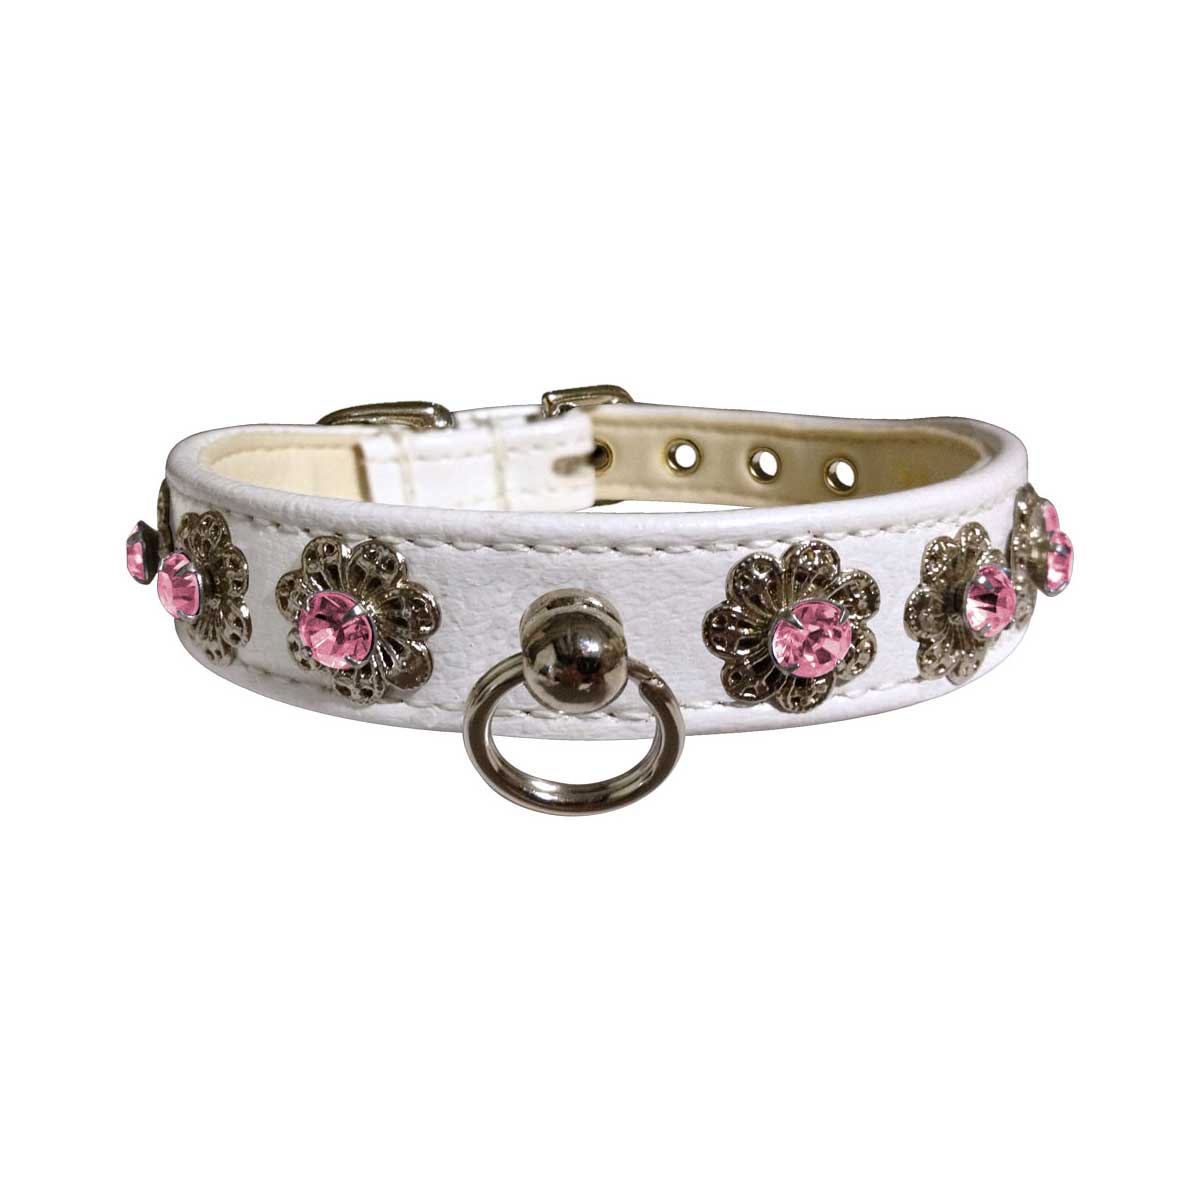 Starlite Faux Leather Collar with Crystal Flowers in White & Pink | Pawlicious & Company